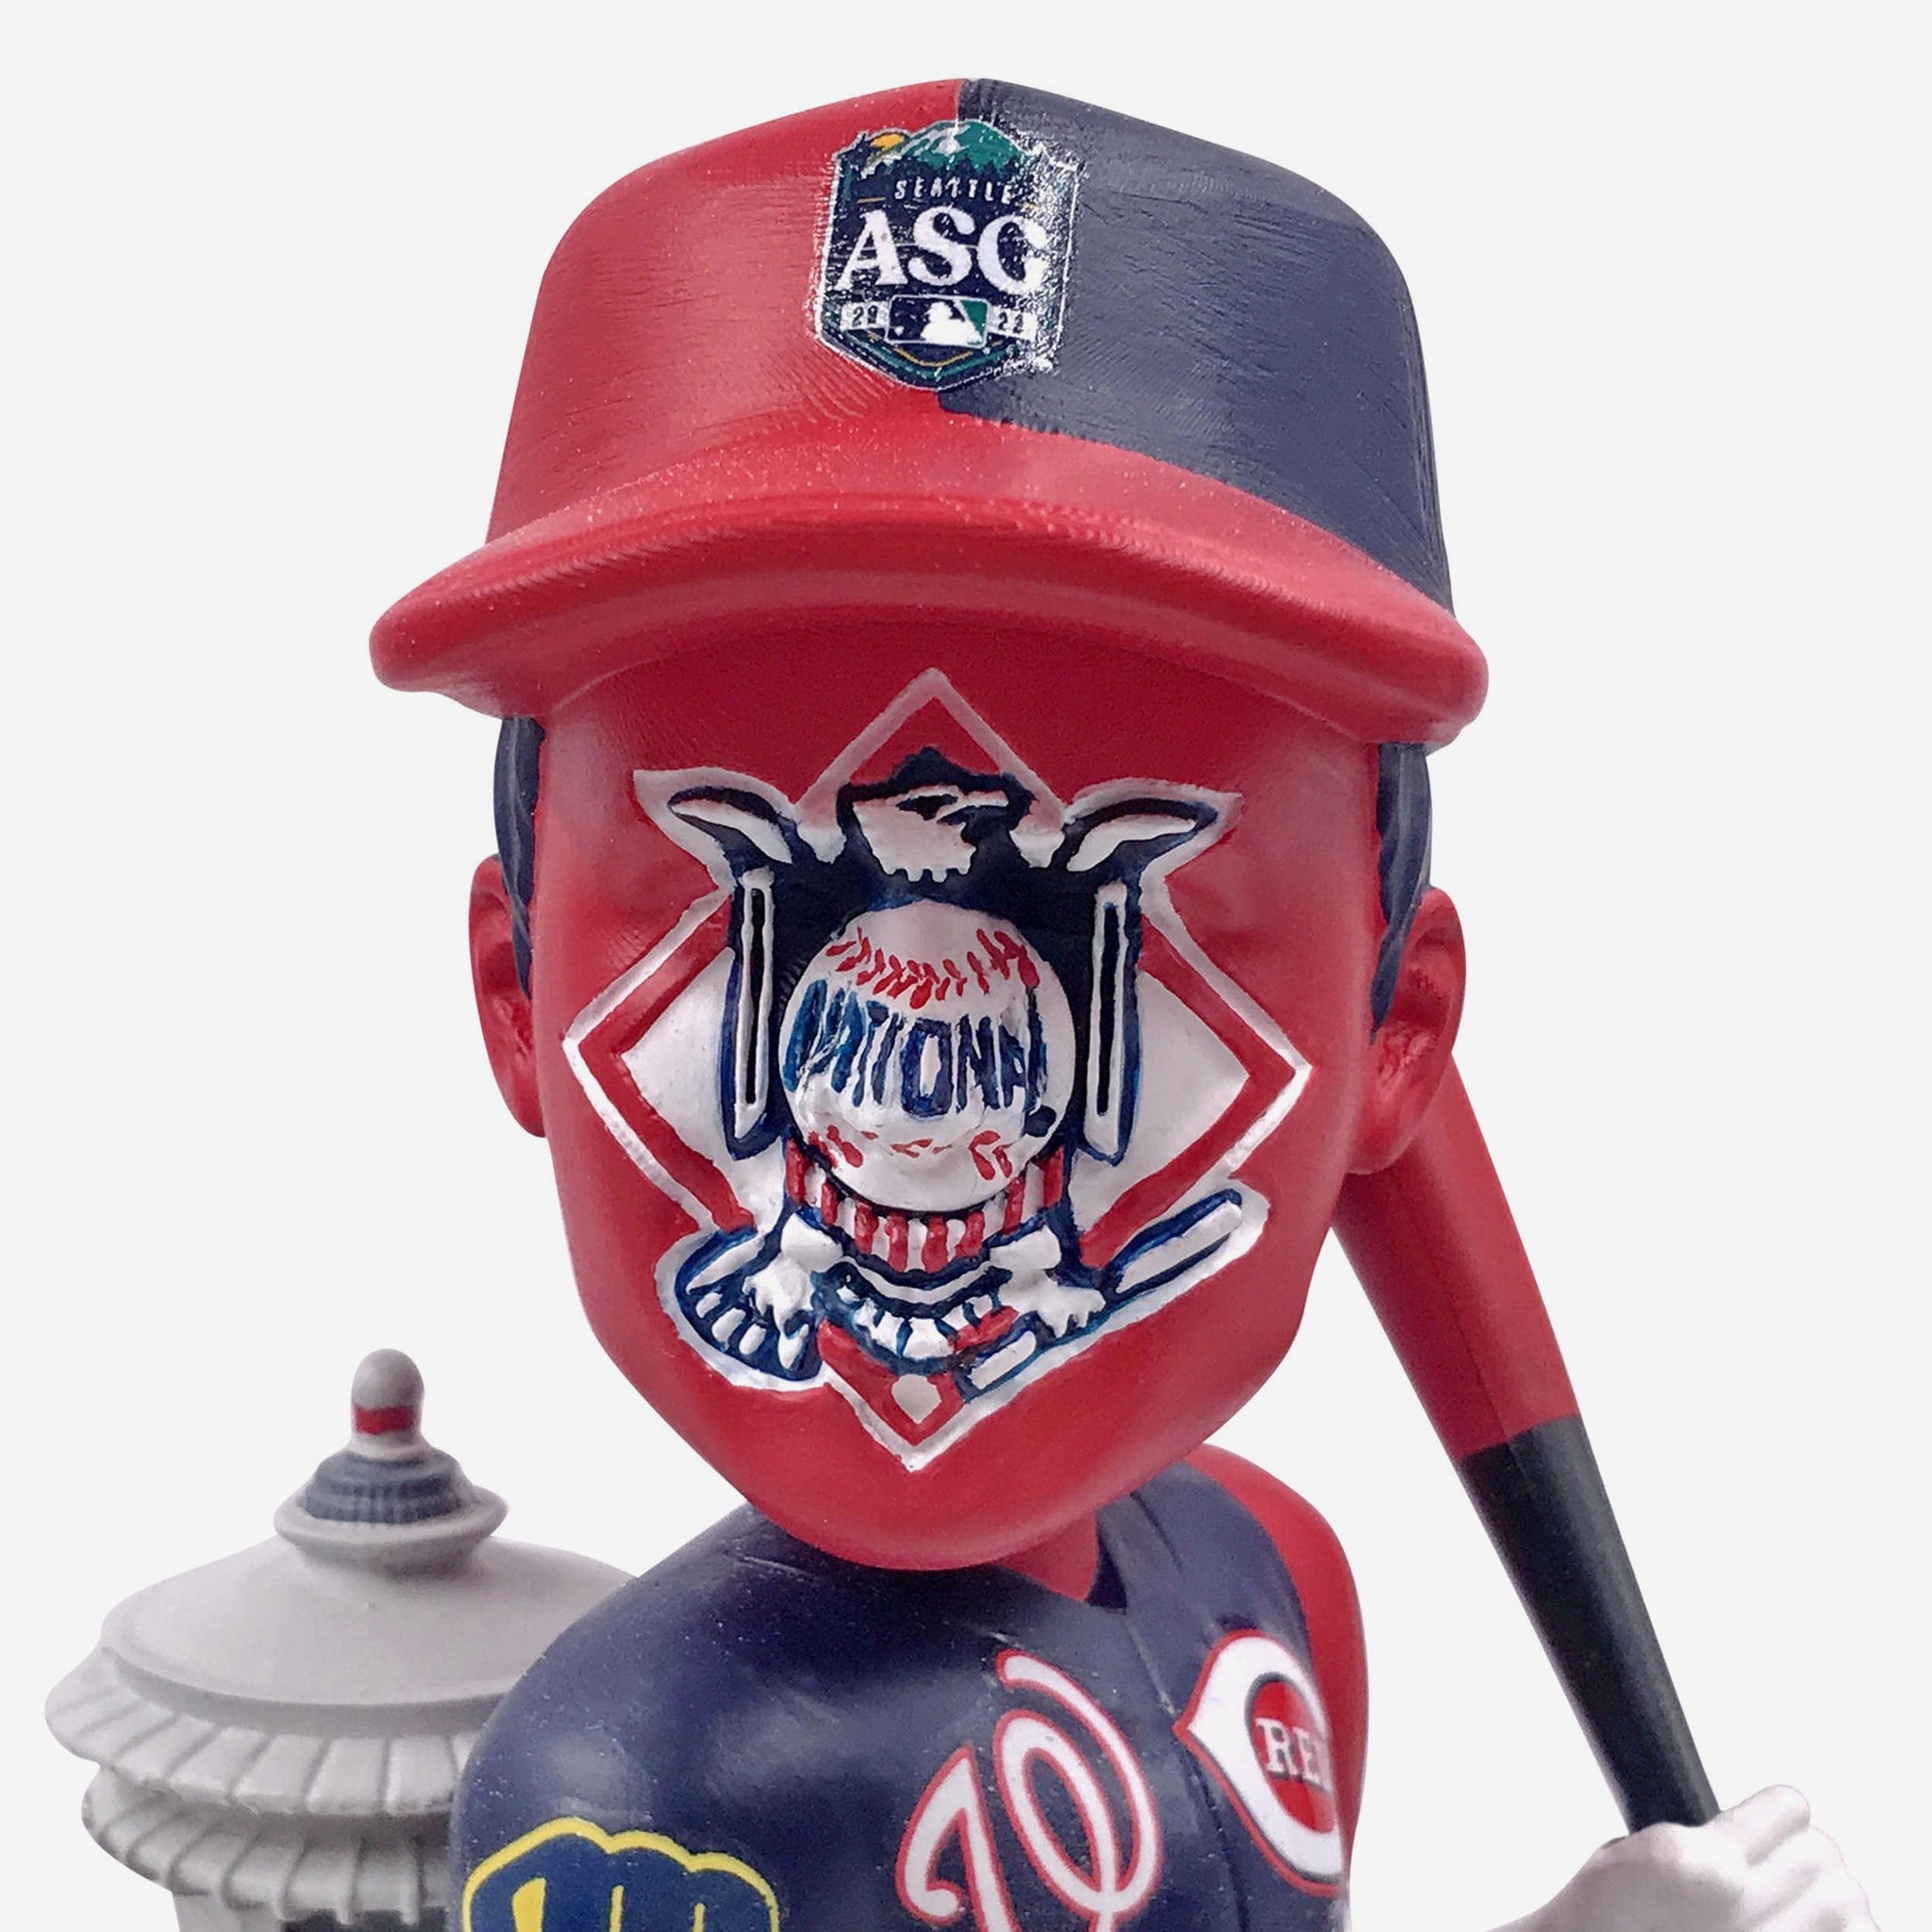 2023 MLB All-Star Commemorative National League Bobblehead Officially Licensed by MLB